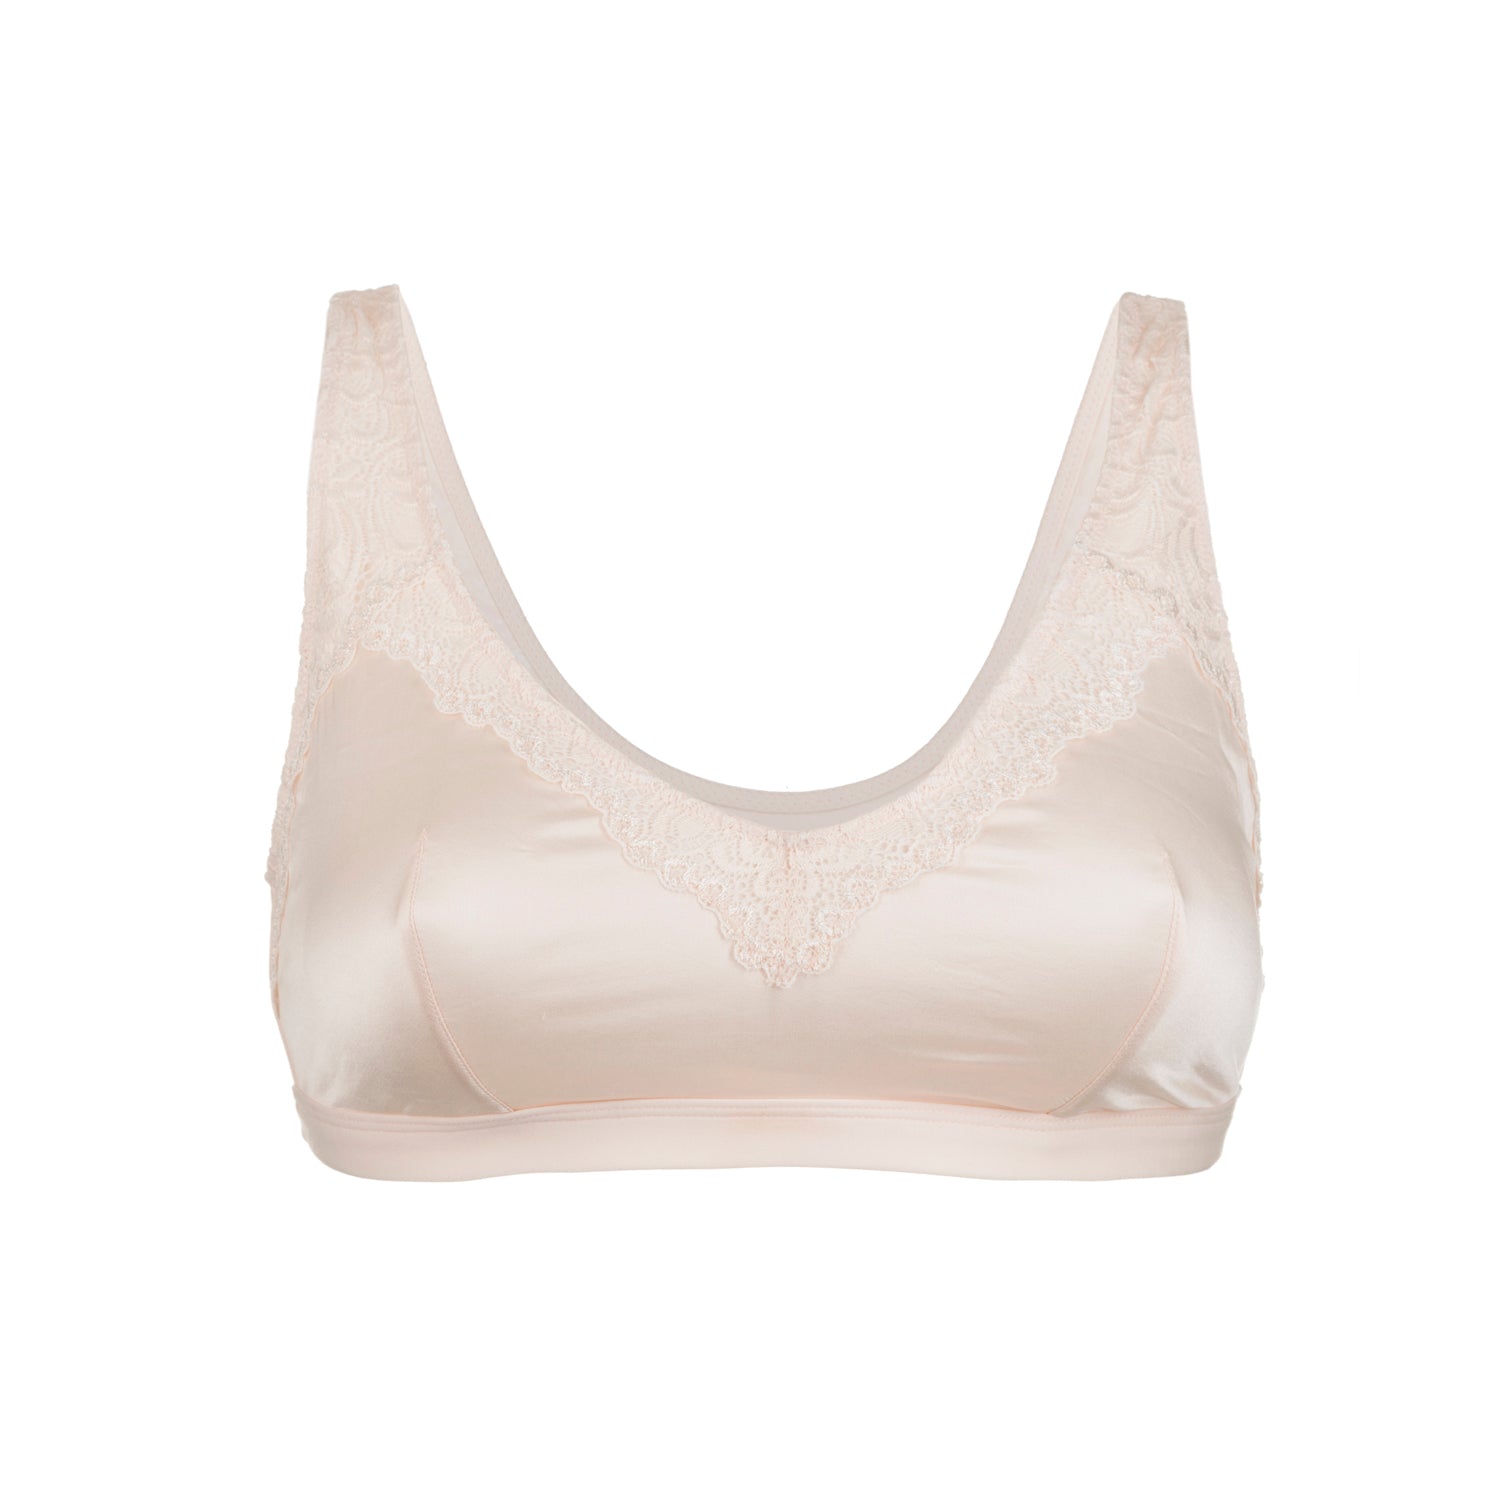 Buy Selfcare Women's Non Padded White and Pink Pure 100% Soft